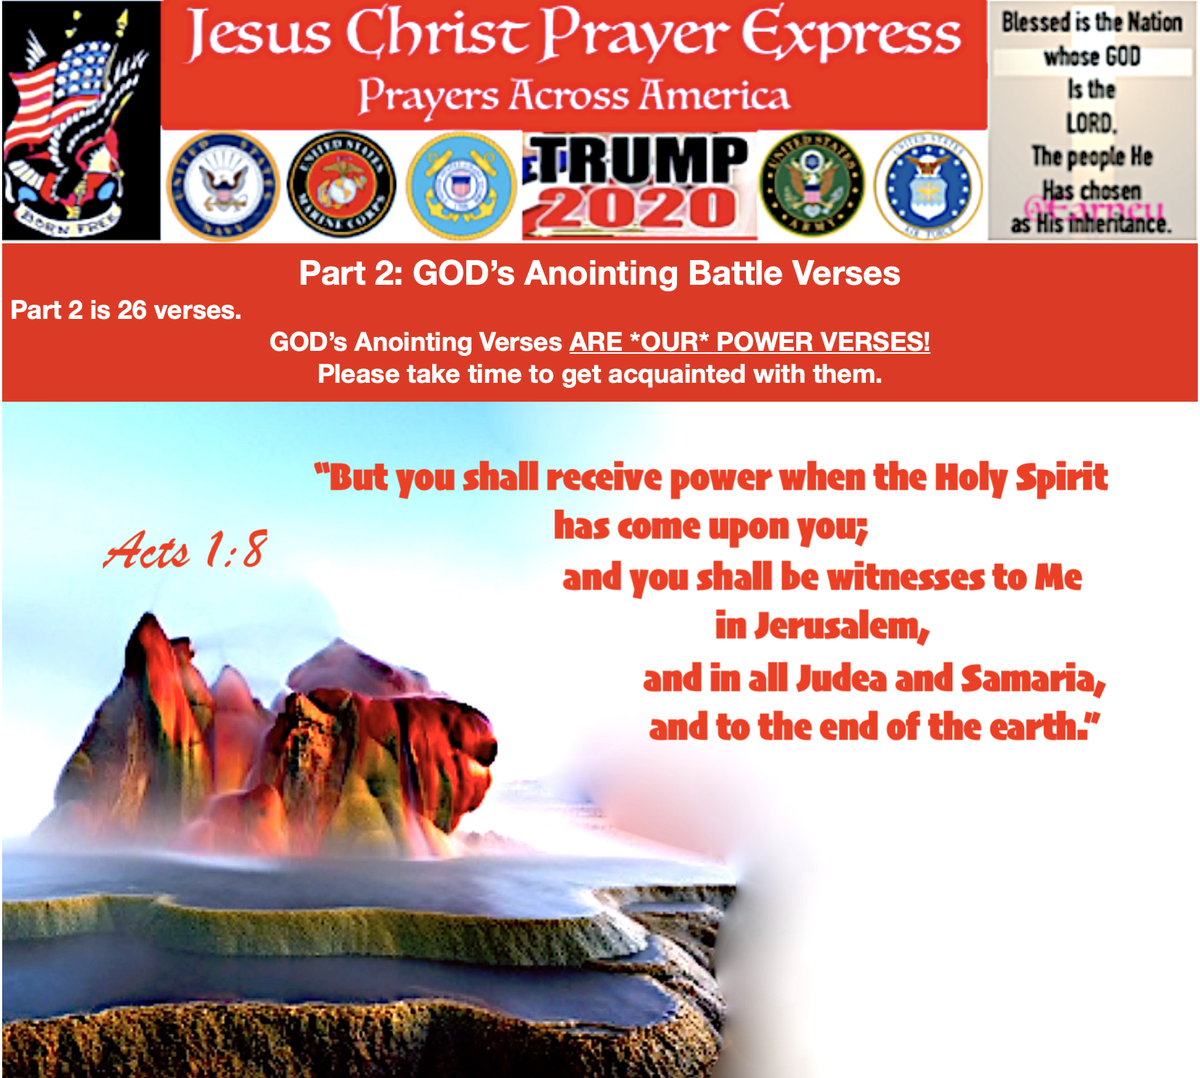 Jesus Christ Prayer Express  #JCPESPIRITUAL WARFARE EDITIONI hope ALL who come by these verses are reading & fully comprehending its meanings:GOD FIRST w/ ALL that YOU are,and you'll never want for anything, never fear anything.God waits for that call. Make it 100%